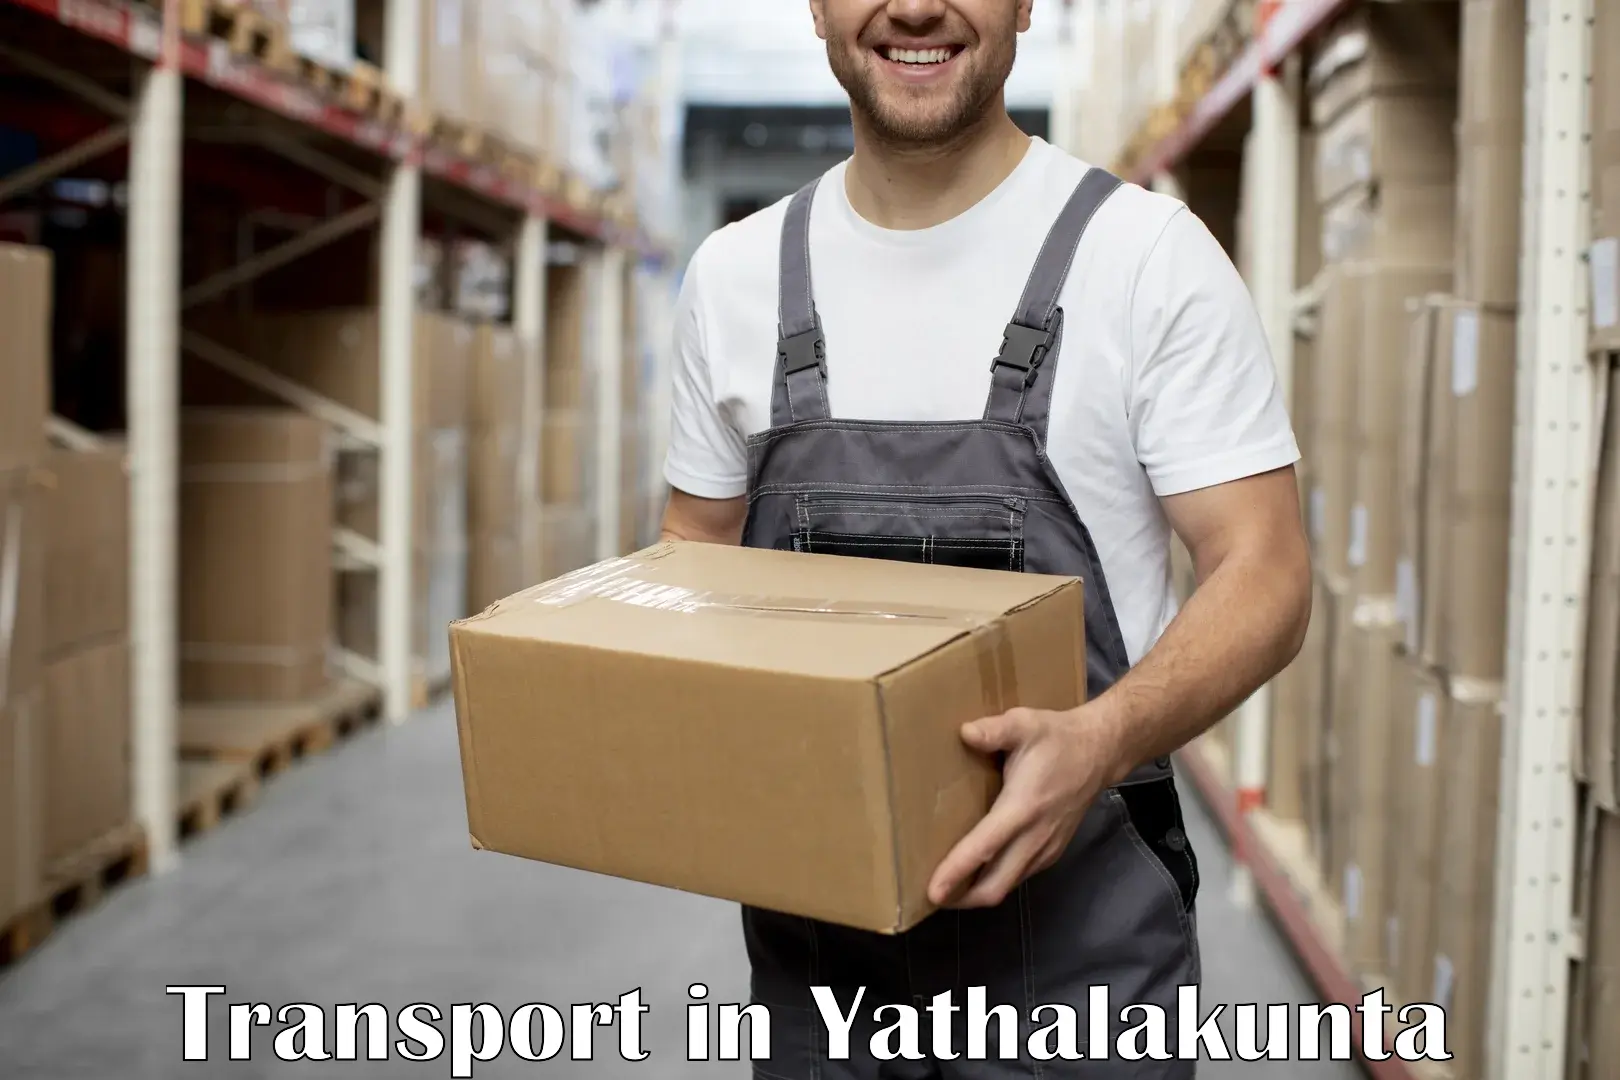 Delivery service in Yathalakunta